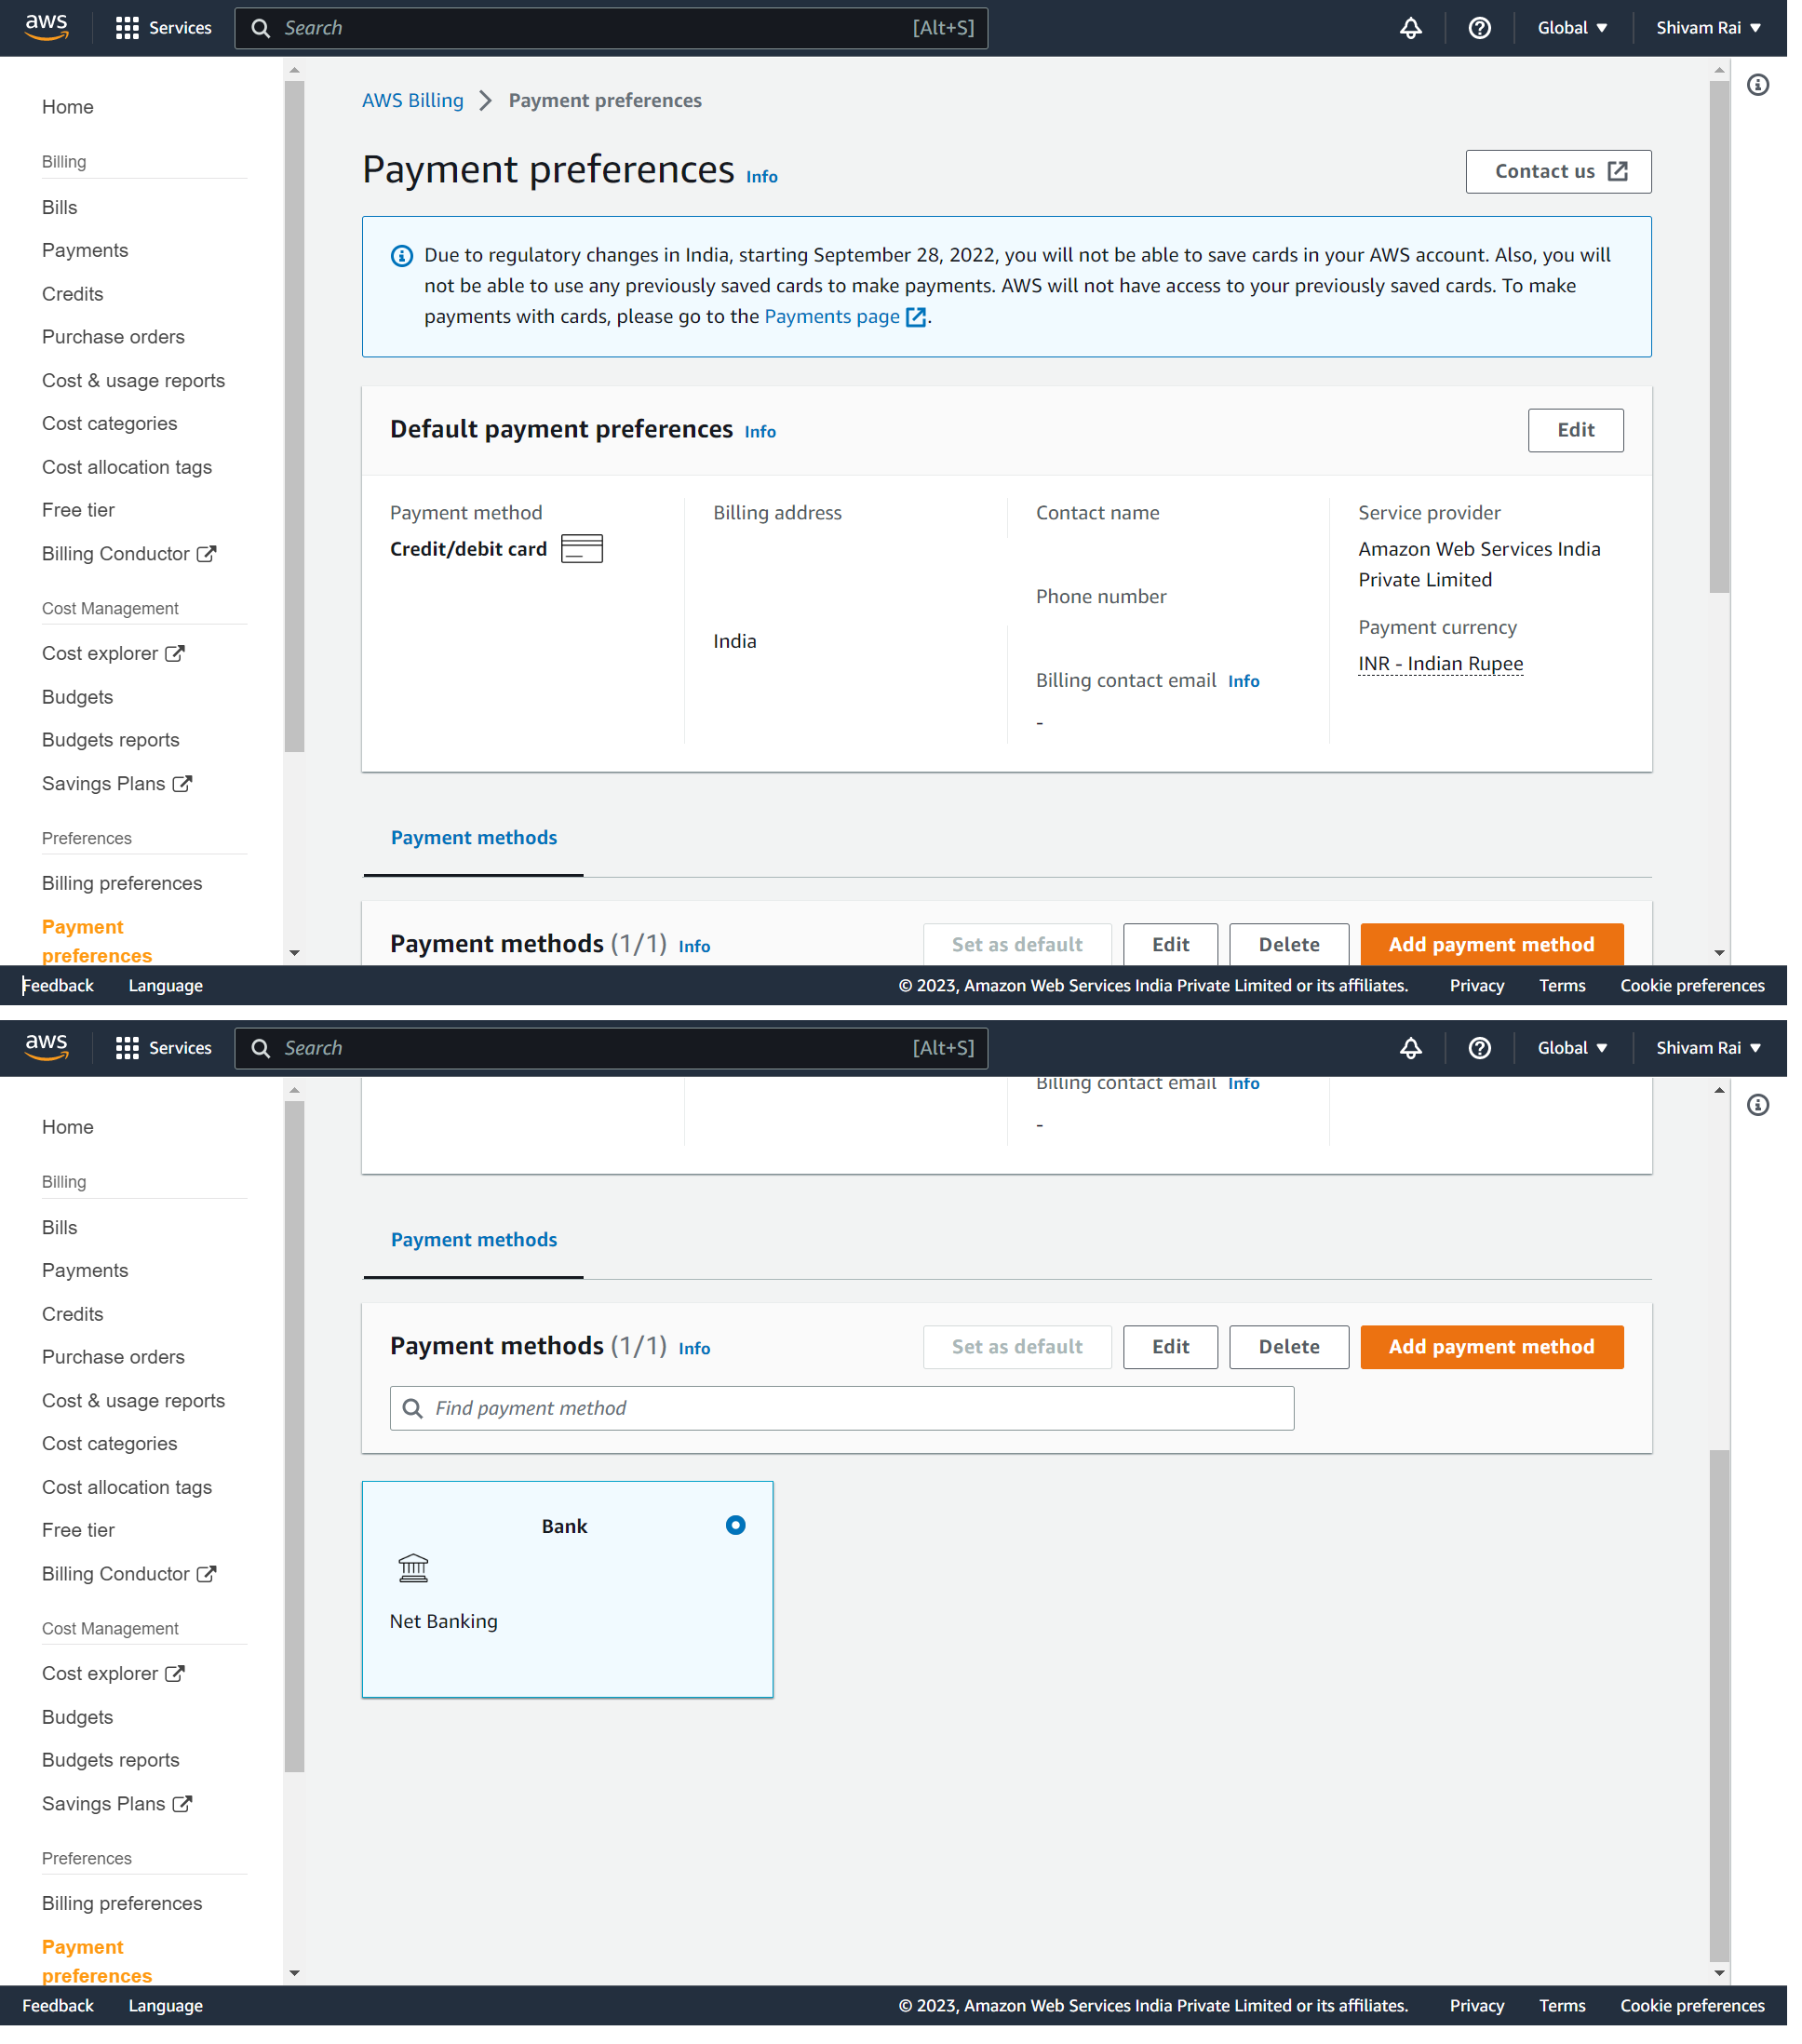 Payment Preferences Tab